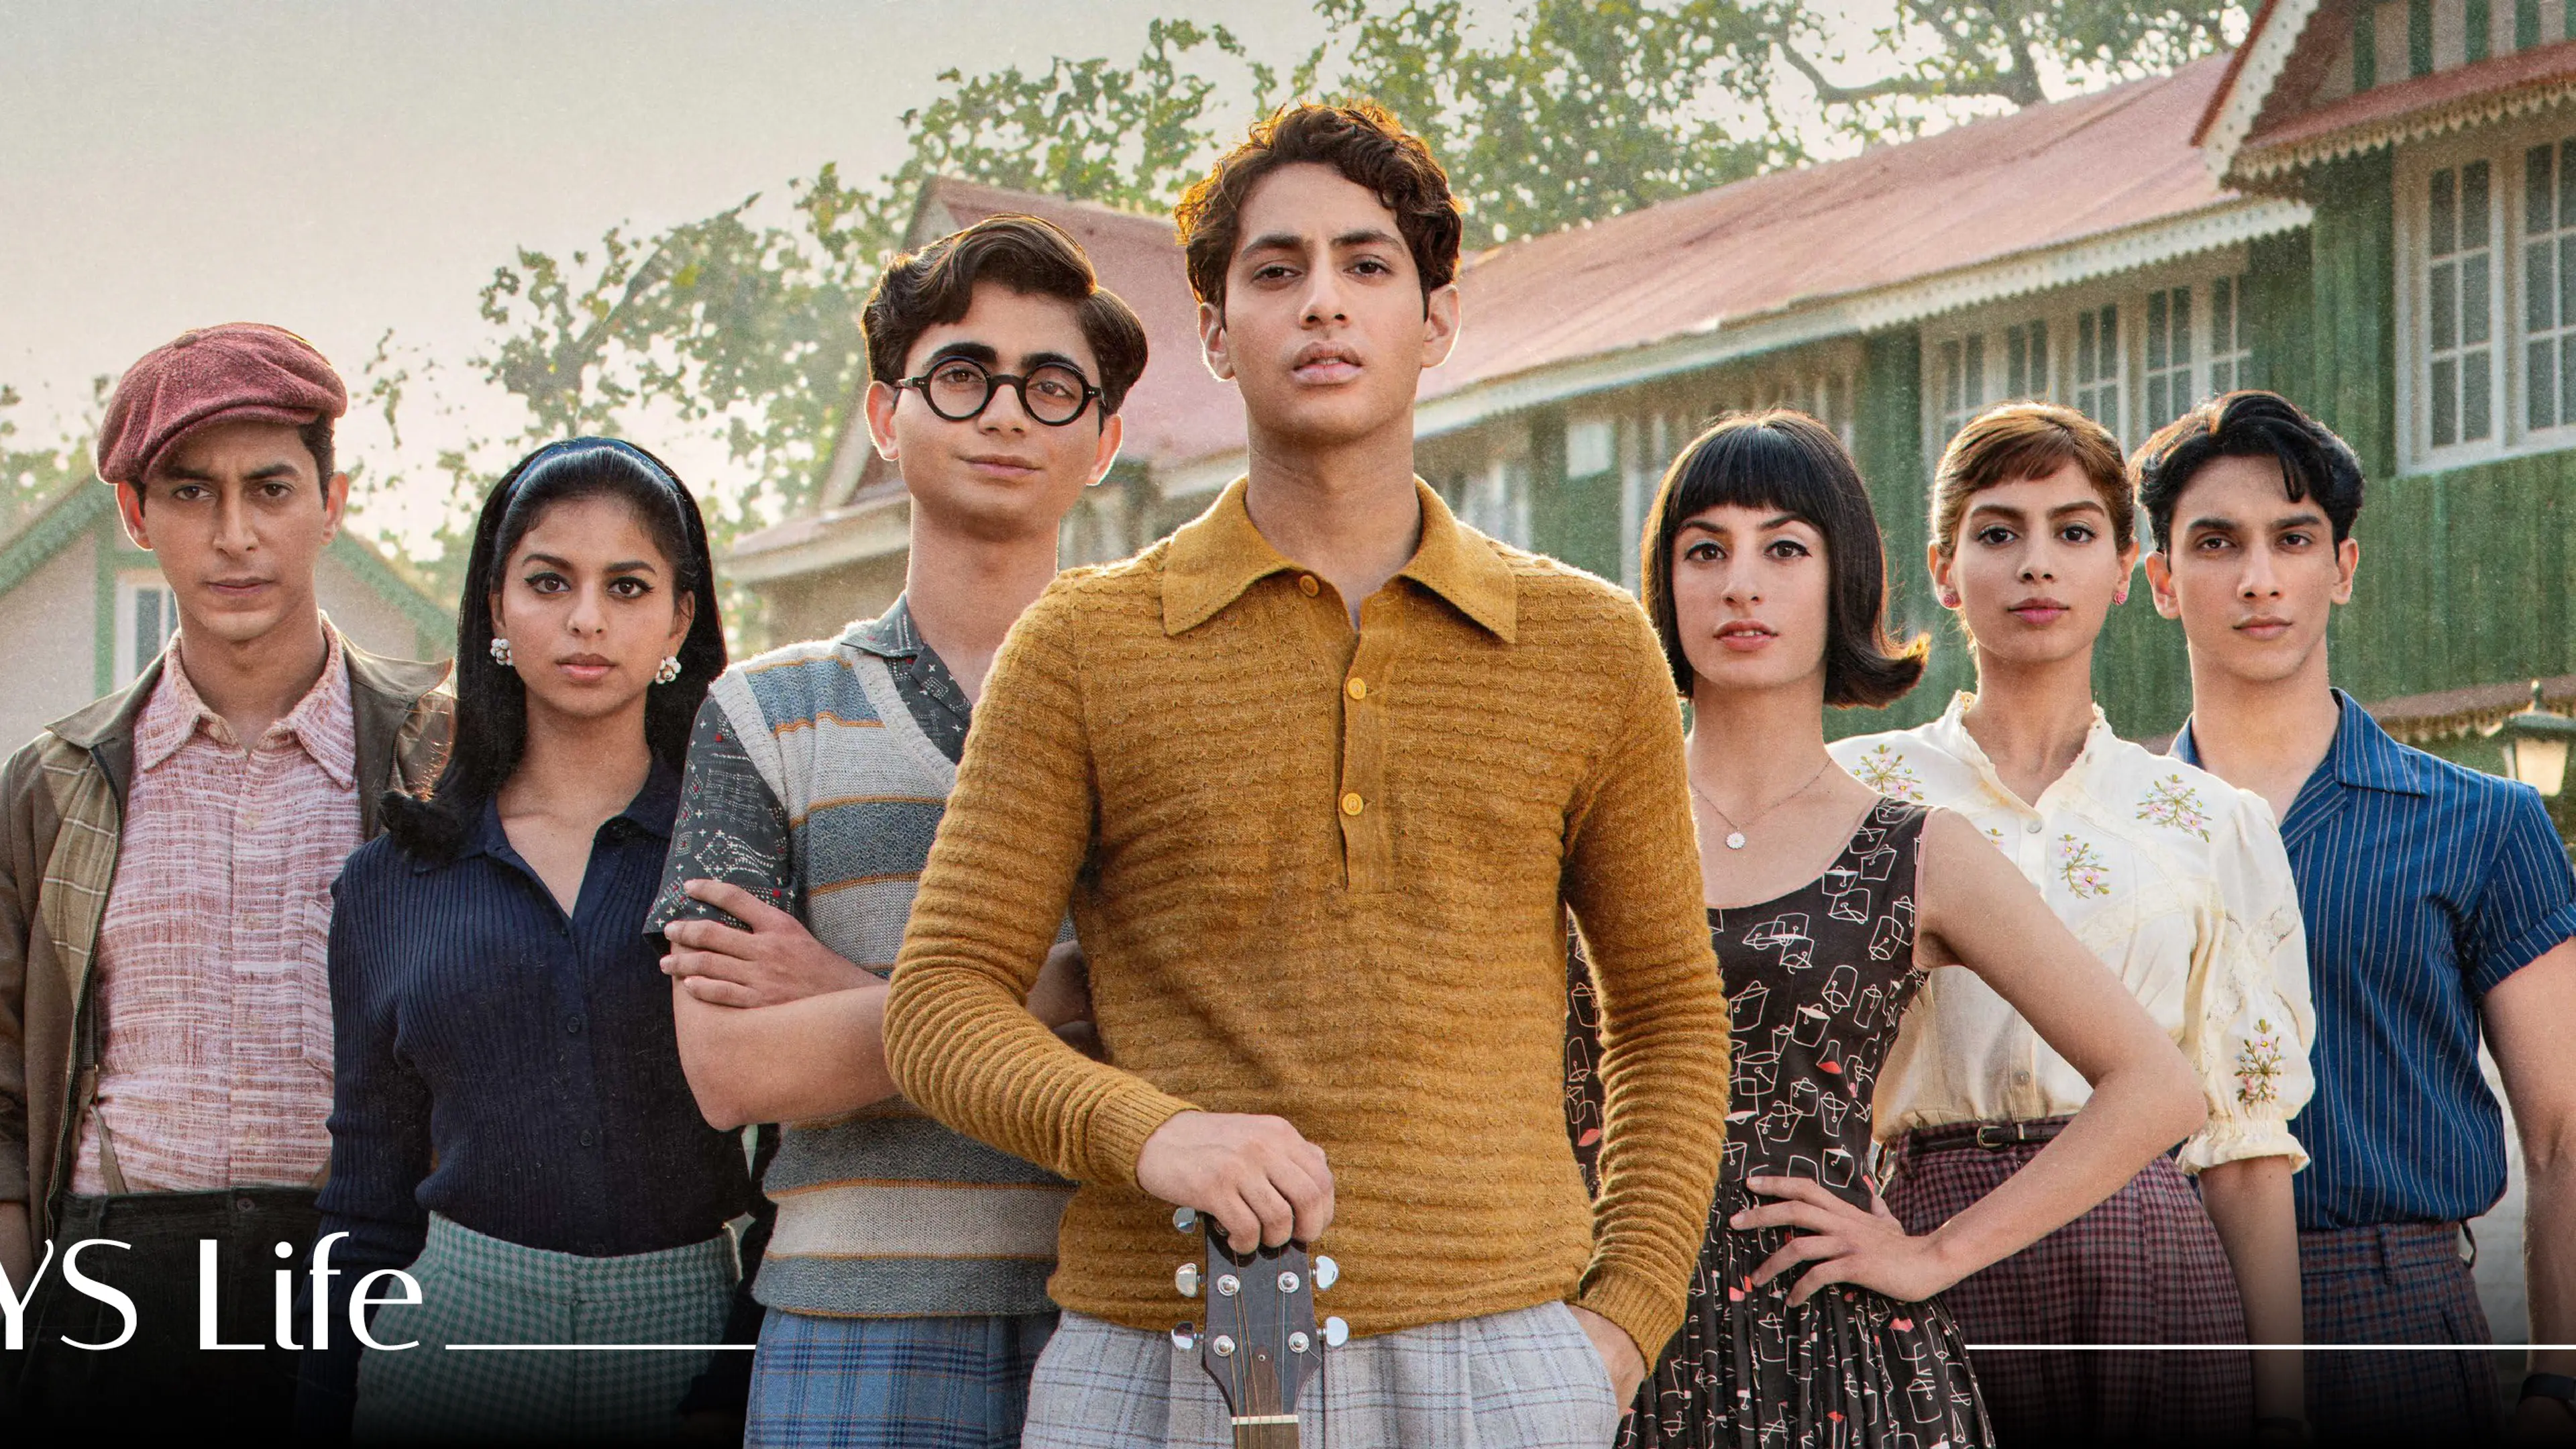 Sweet and visually stunning: Zoya Akhtar’s The Archies is an easy musical watch and a trip down memory lane 